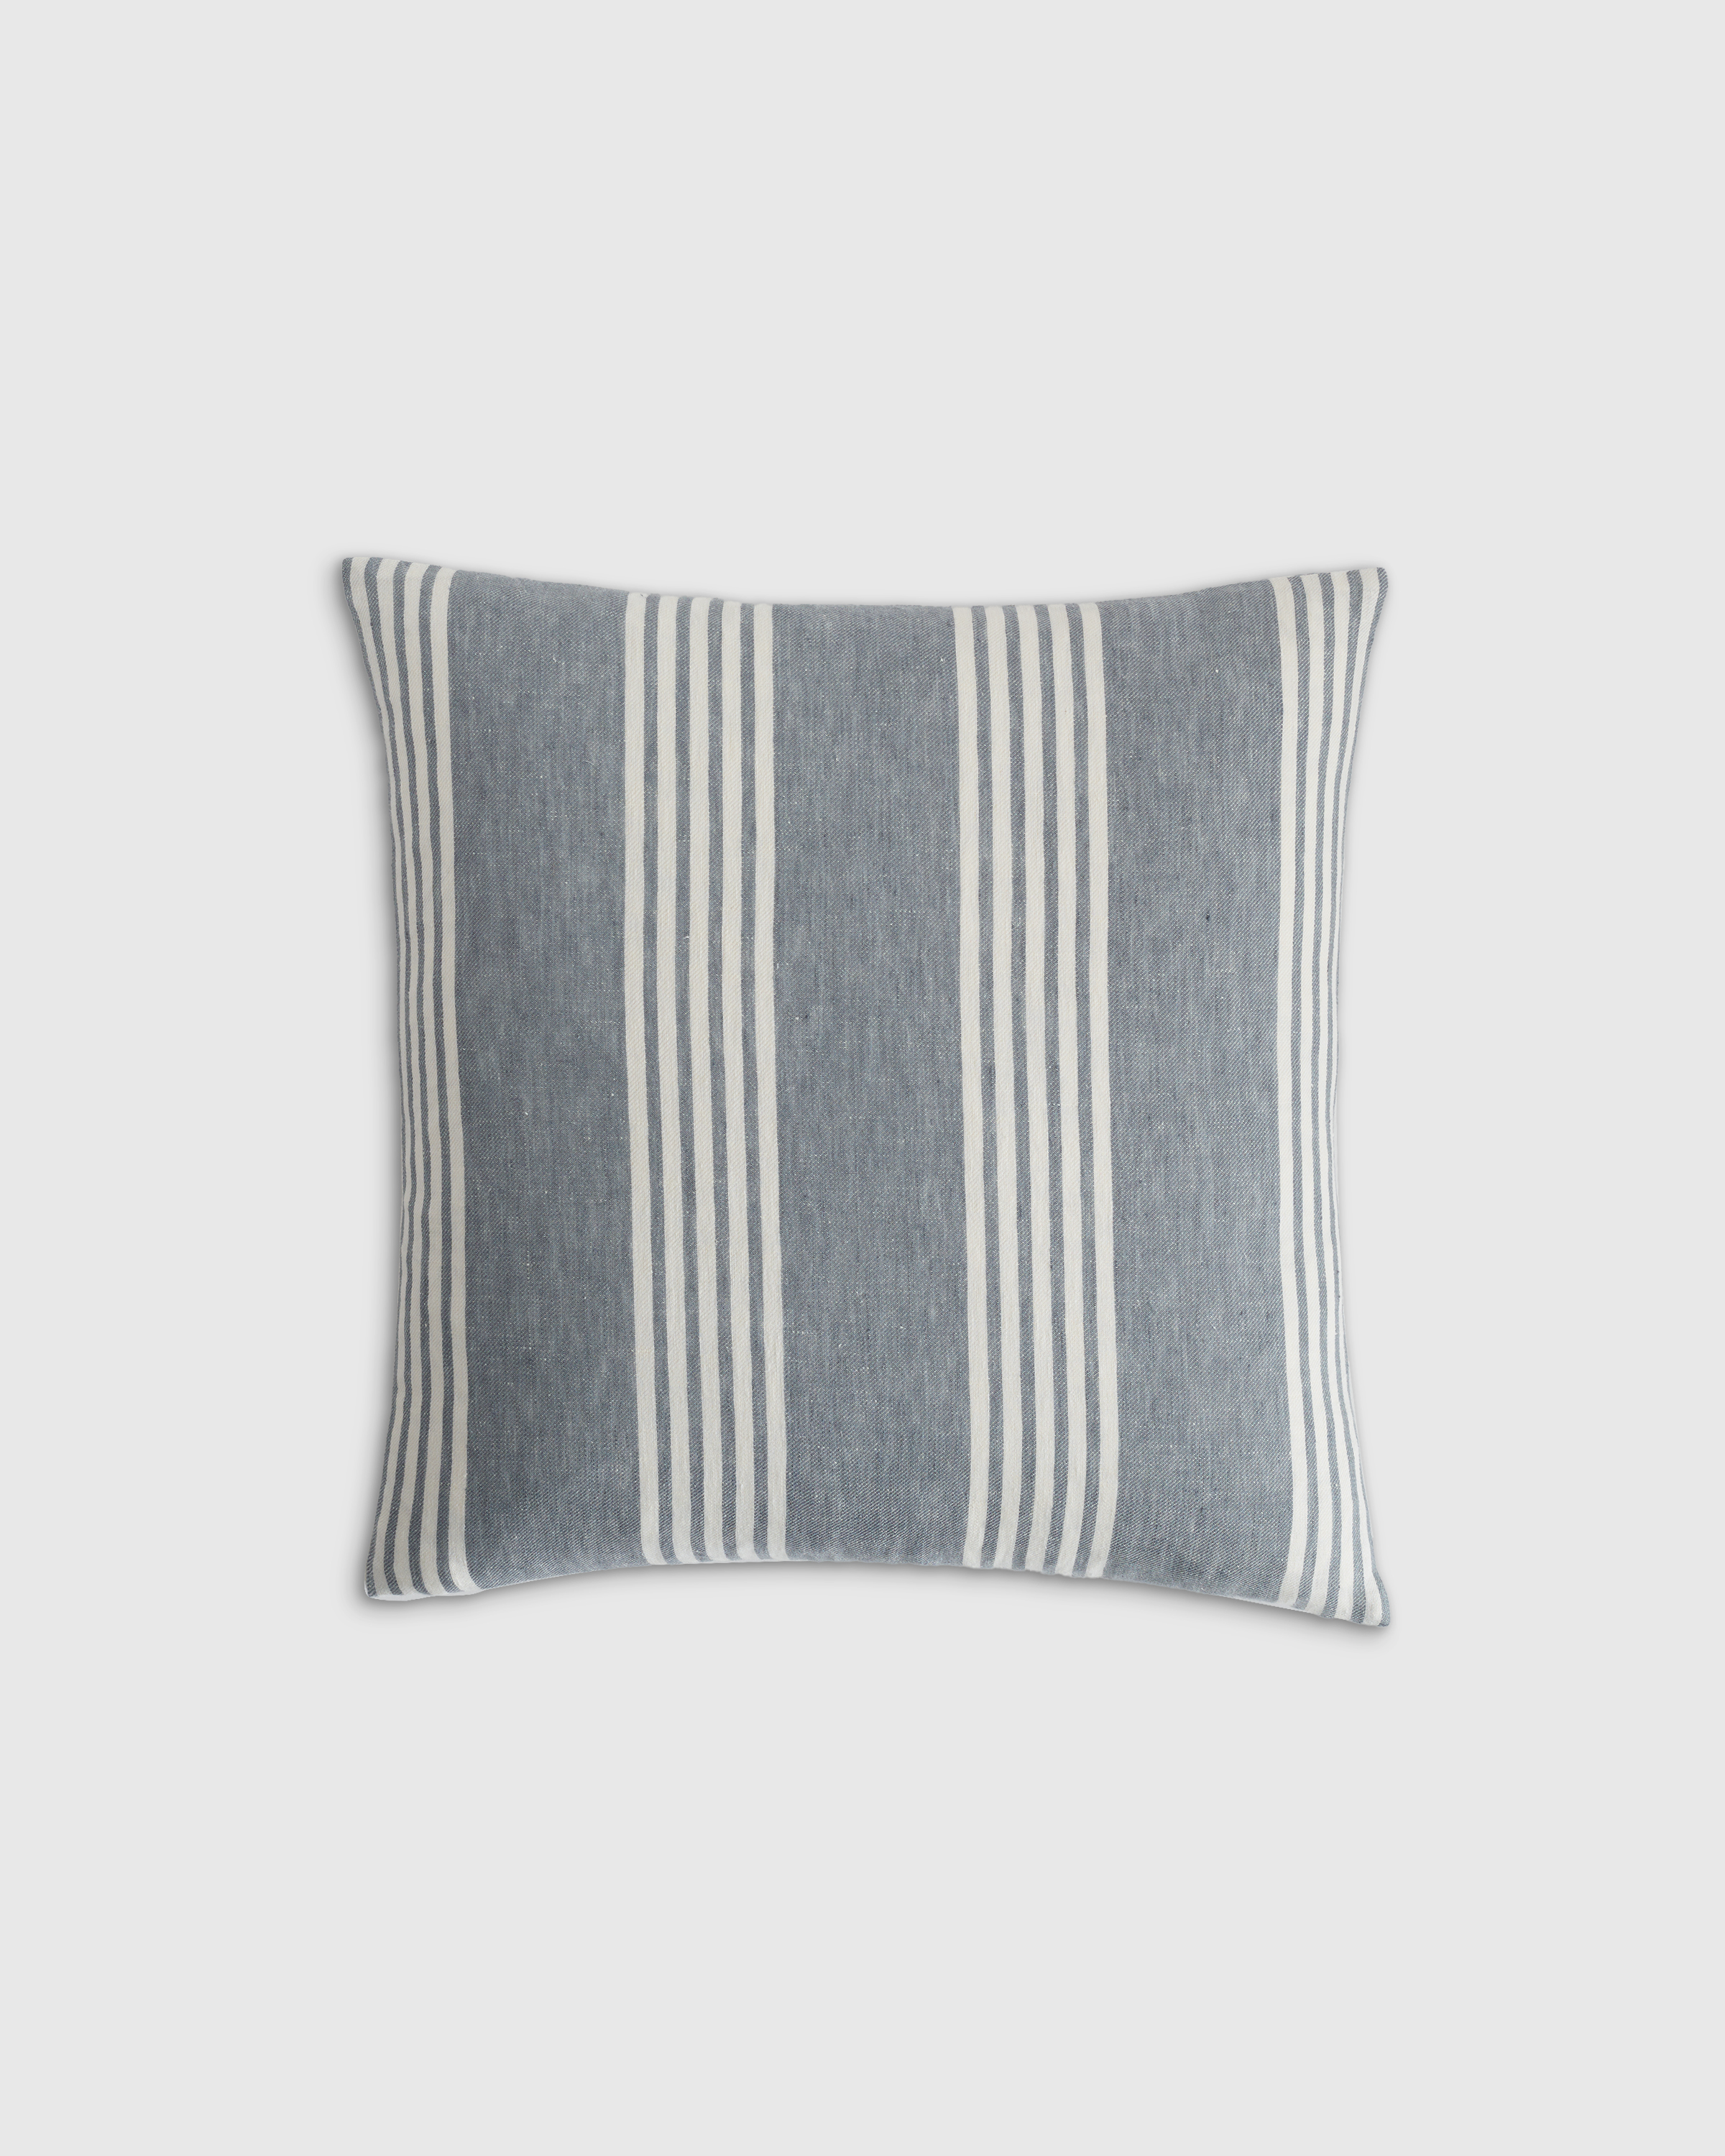 Quince Sloane Linen Reversible Woven Stripe Pillow Cover In Chambray/white